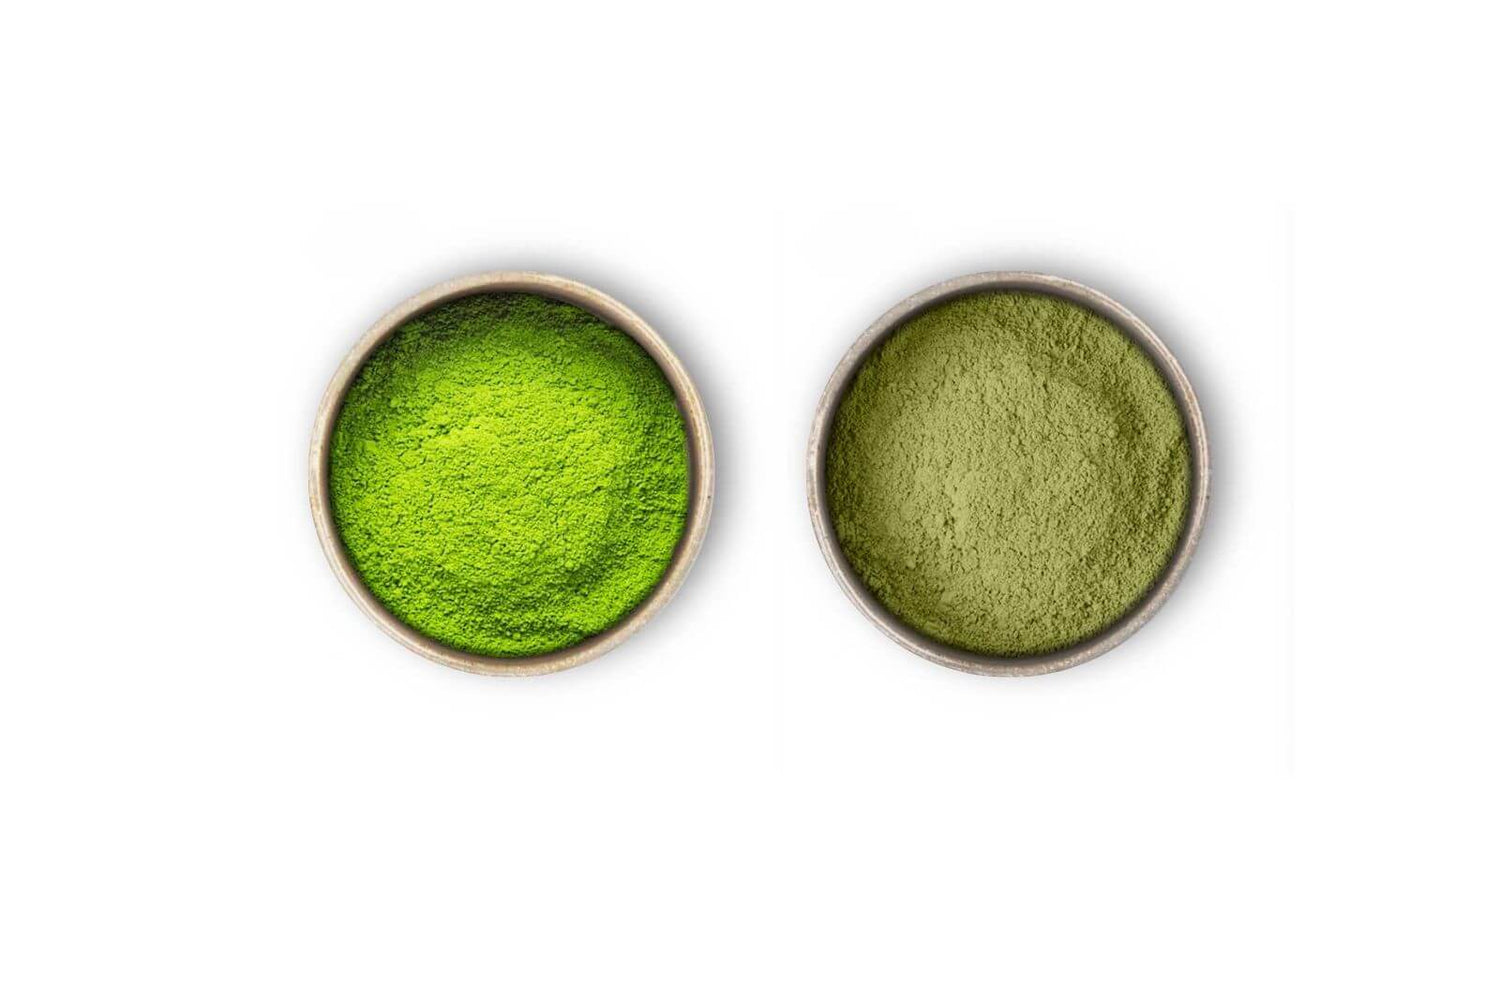 difference of color between ceremonial matcha grade and other grade